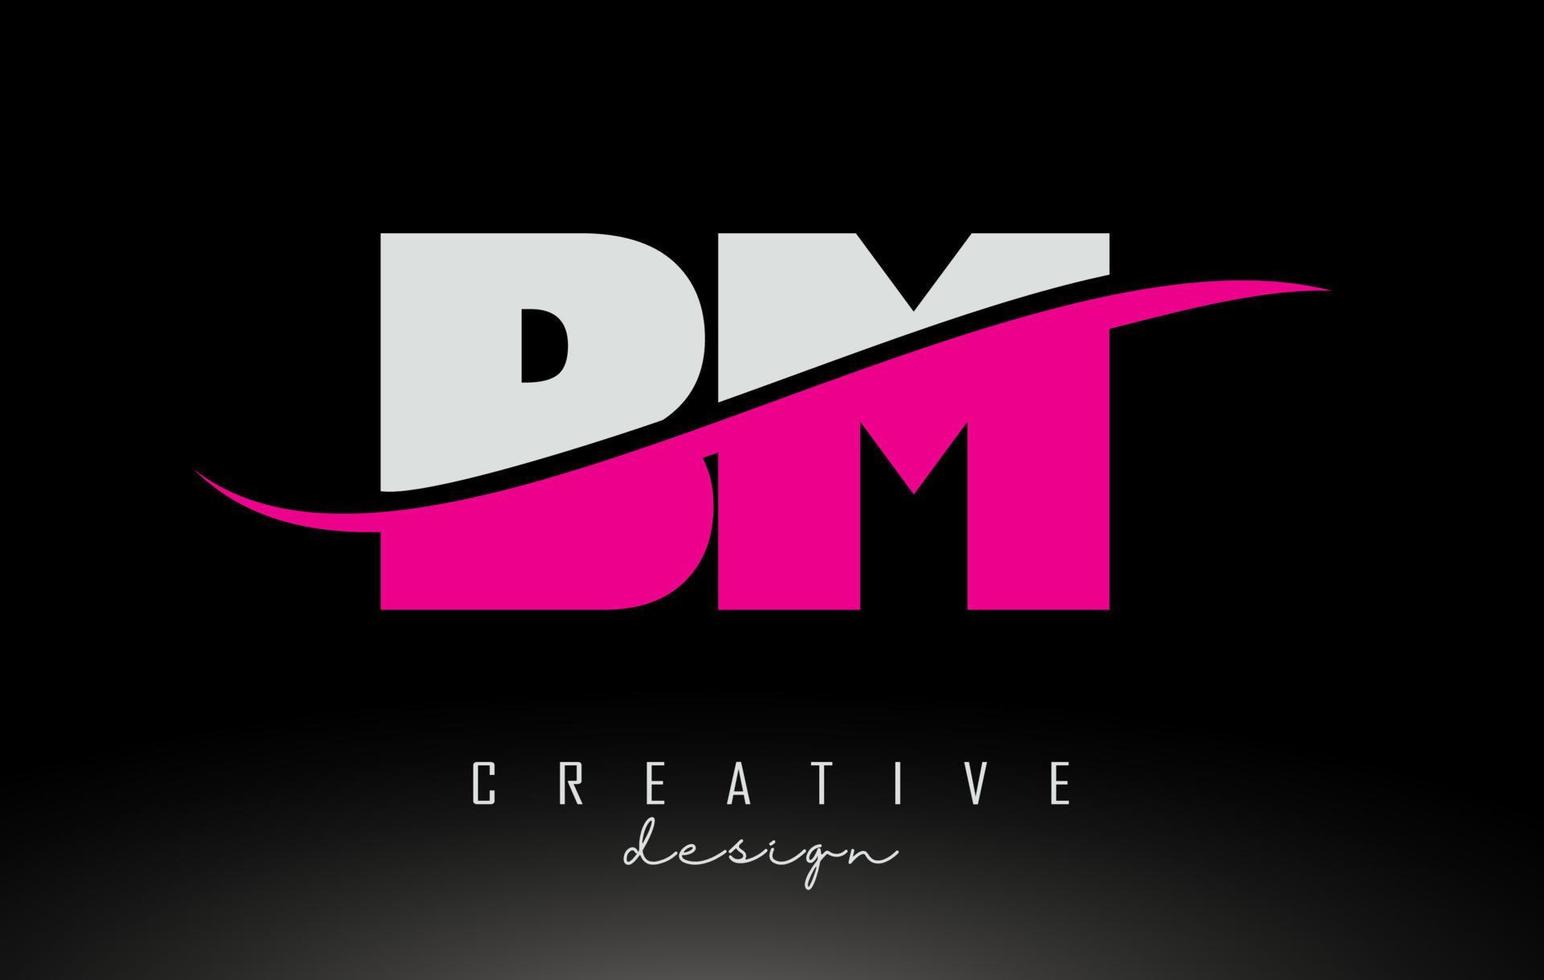 BM B M White andPinkYellow Letter Logo with Swoosh. vector